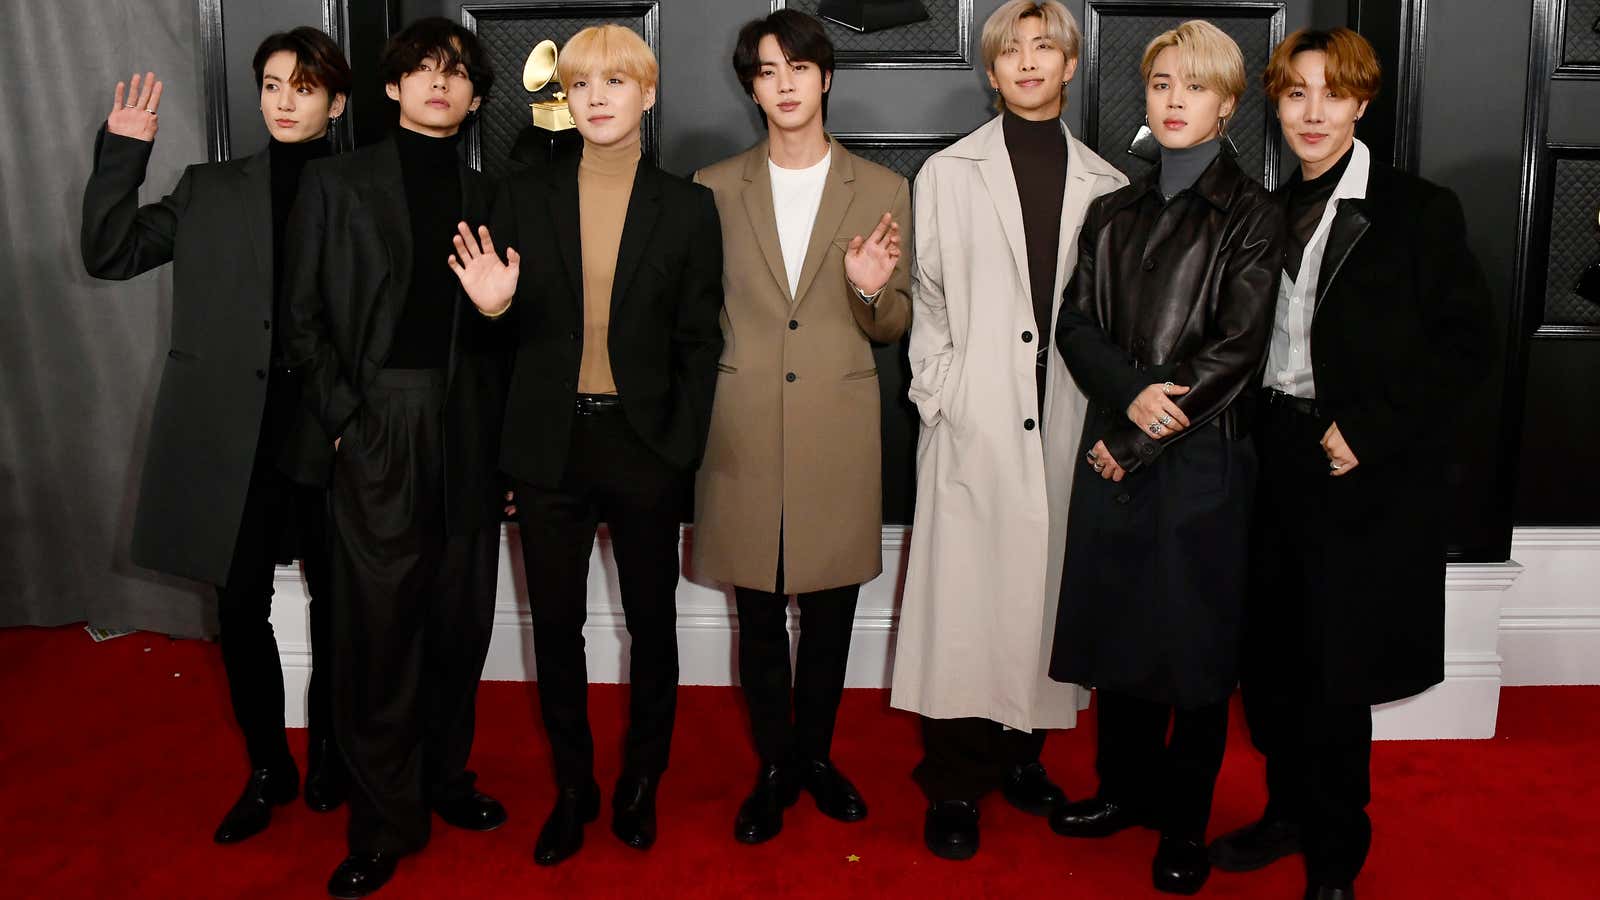 BTS has found global superstardom, vaulting its label Hybe into pole position in the Korean music industry.